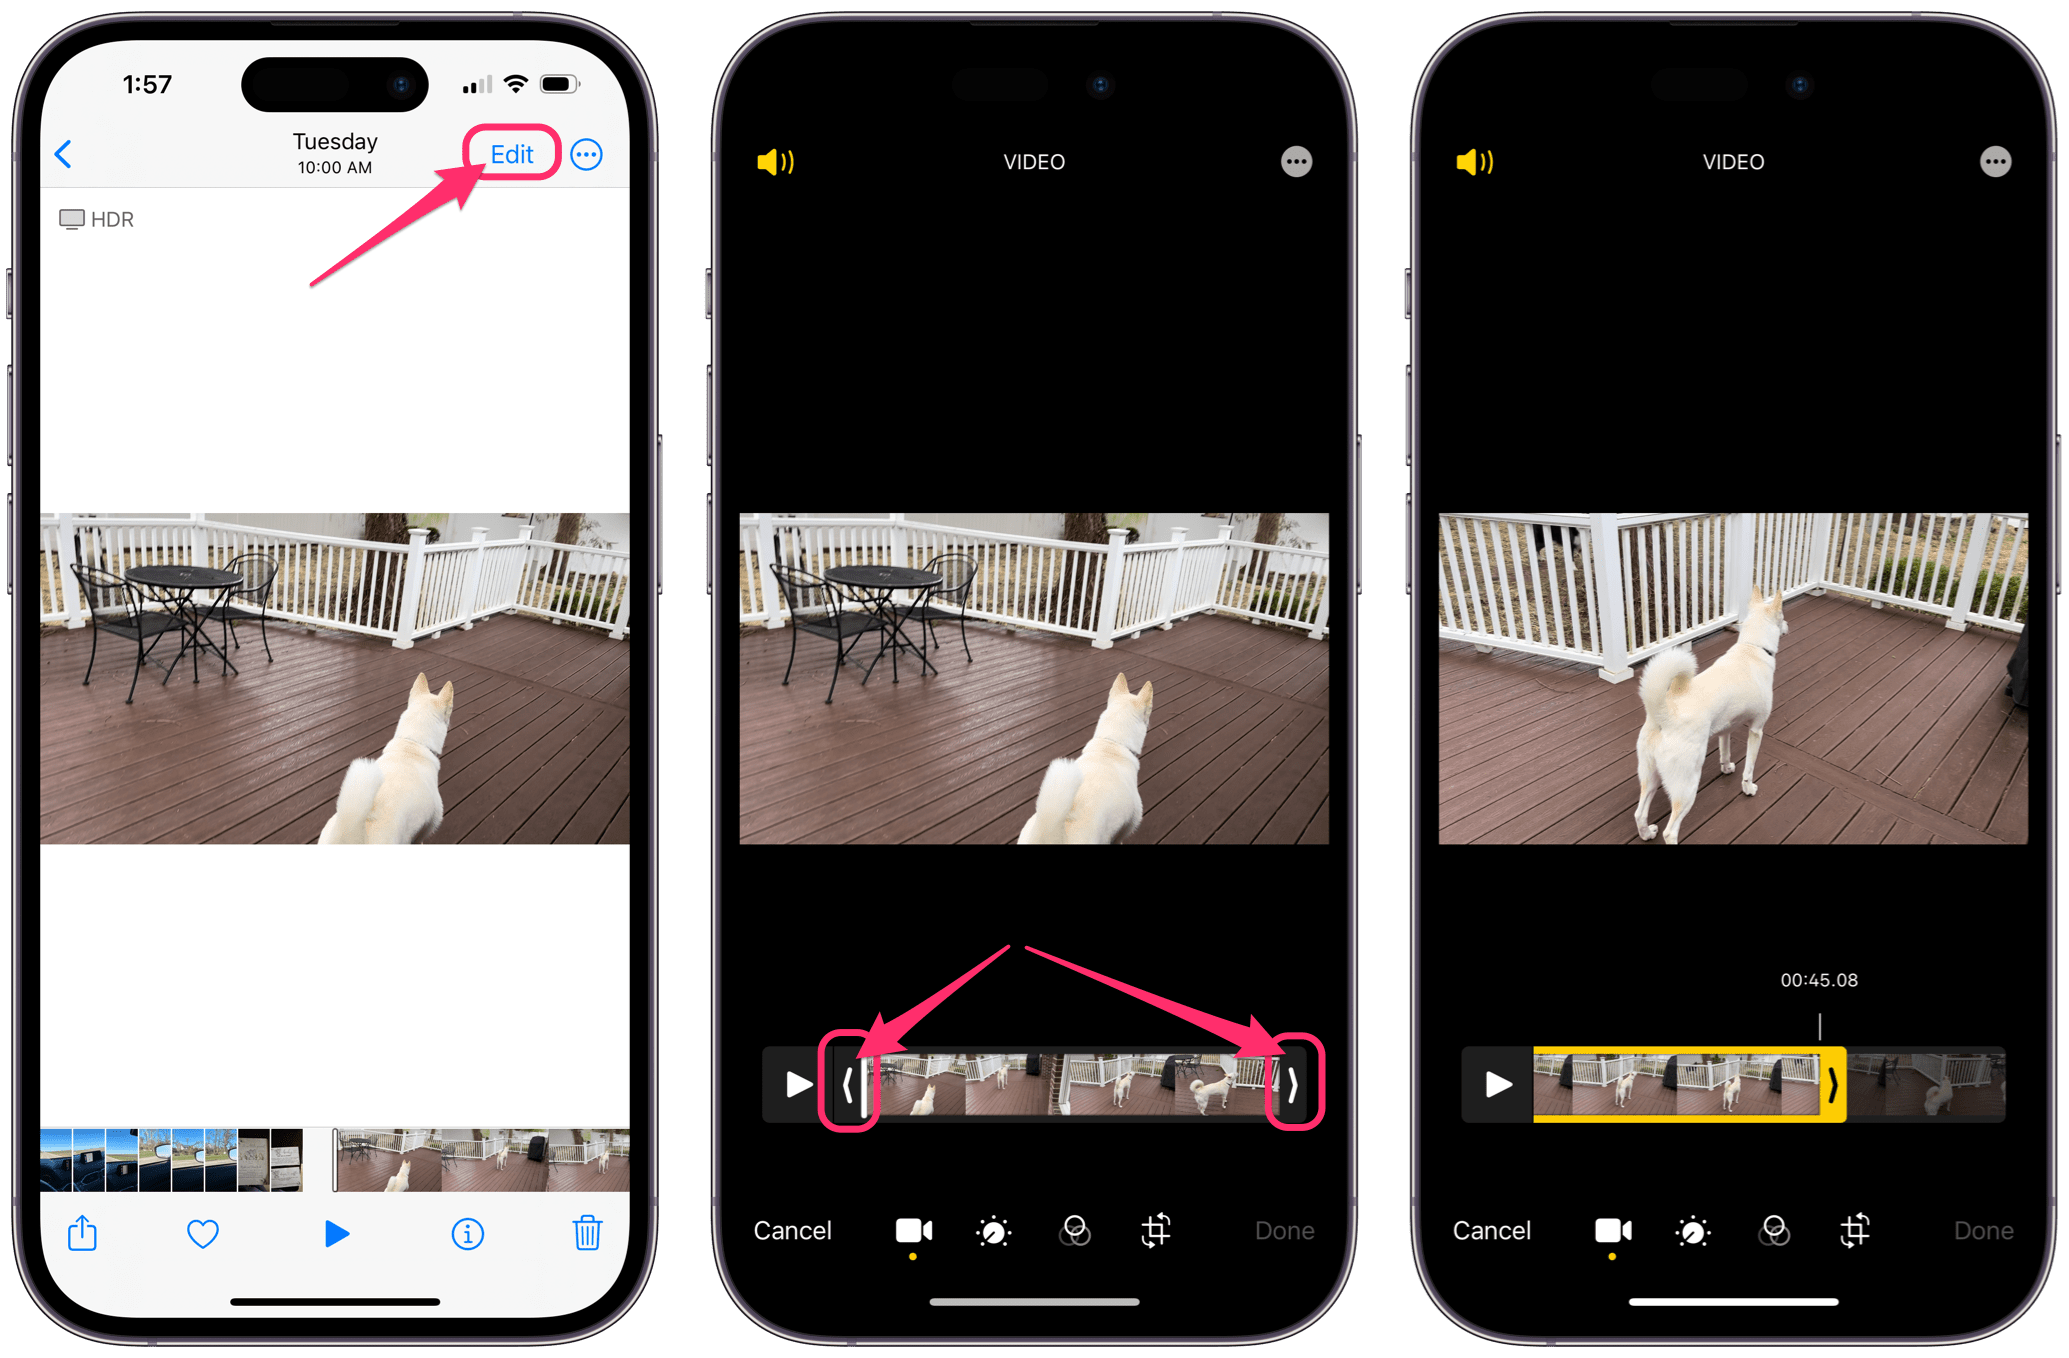 shorten a video in Photos app by cutting beginning or end